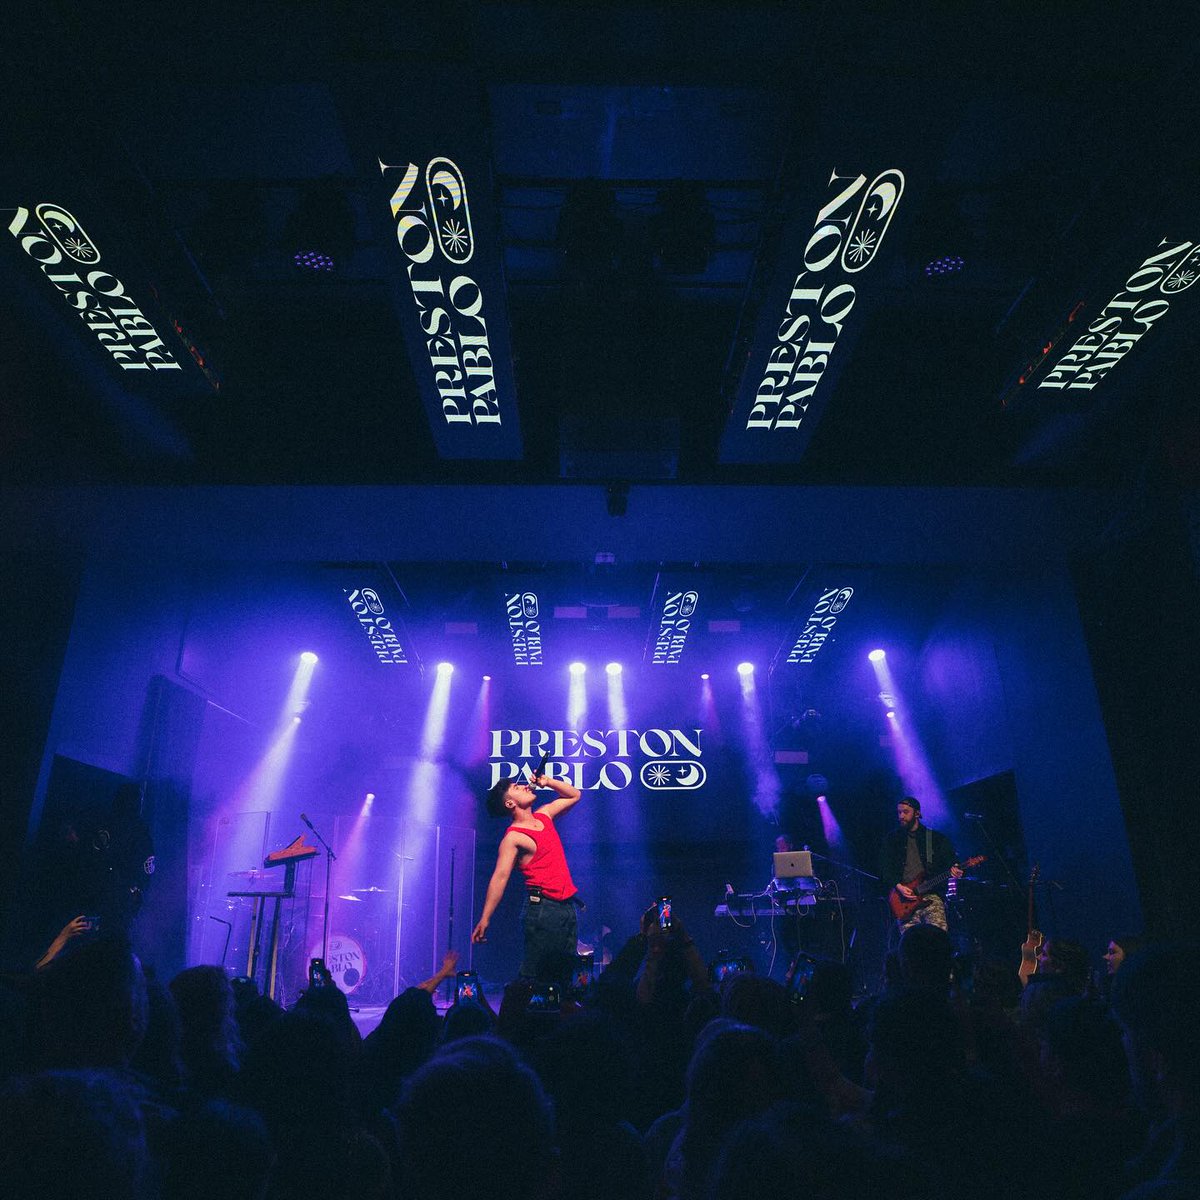 I moved to Toronto last year with some big dreams and not much else. Last week I played a show here to a room full of you and I’ve never felt more at home. Thank you for making me feel loved. Can’t wait to do it again soon❤️